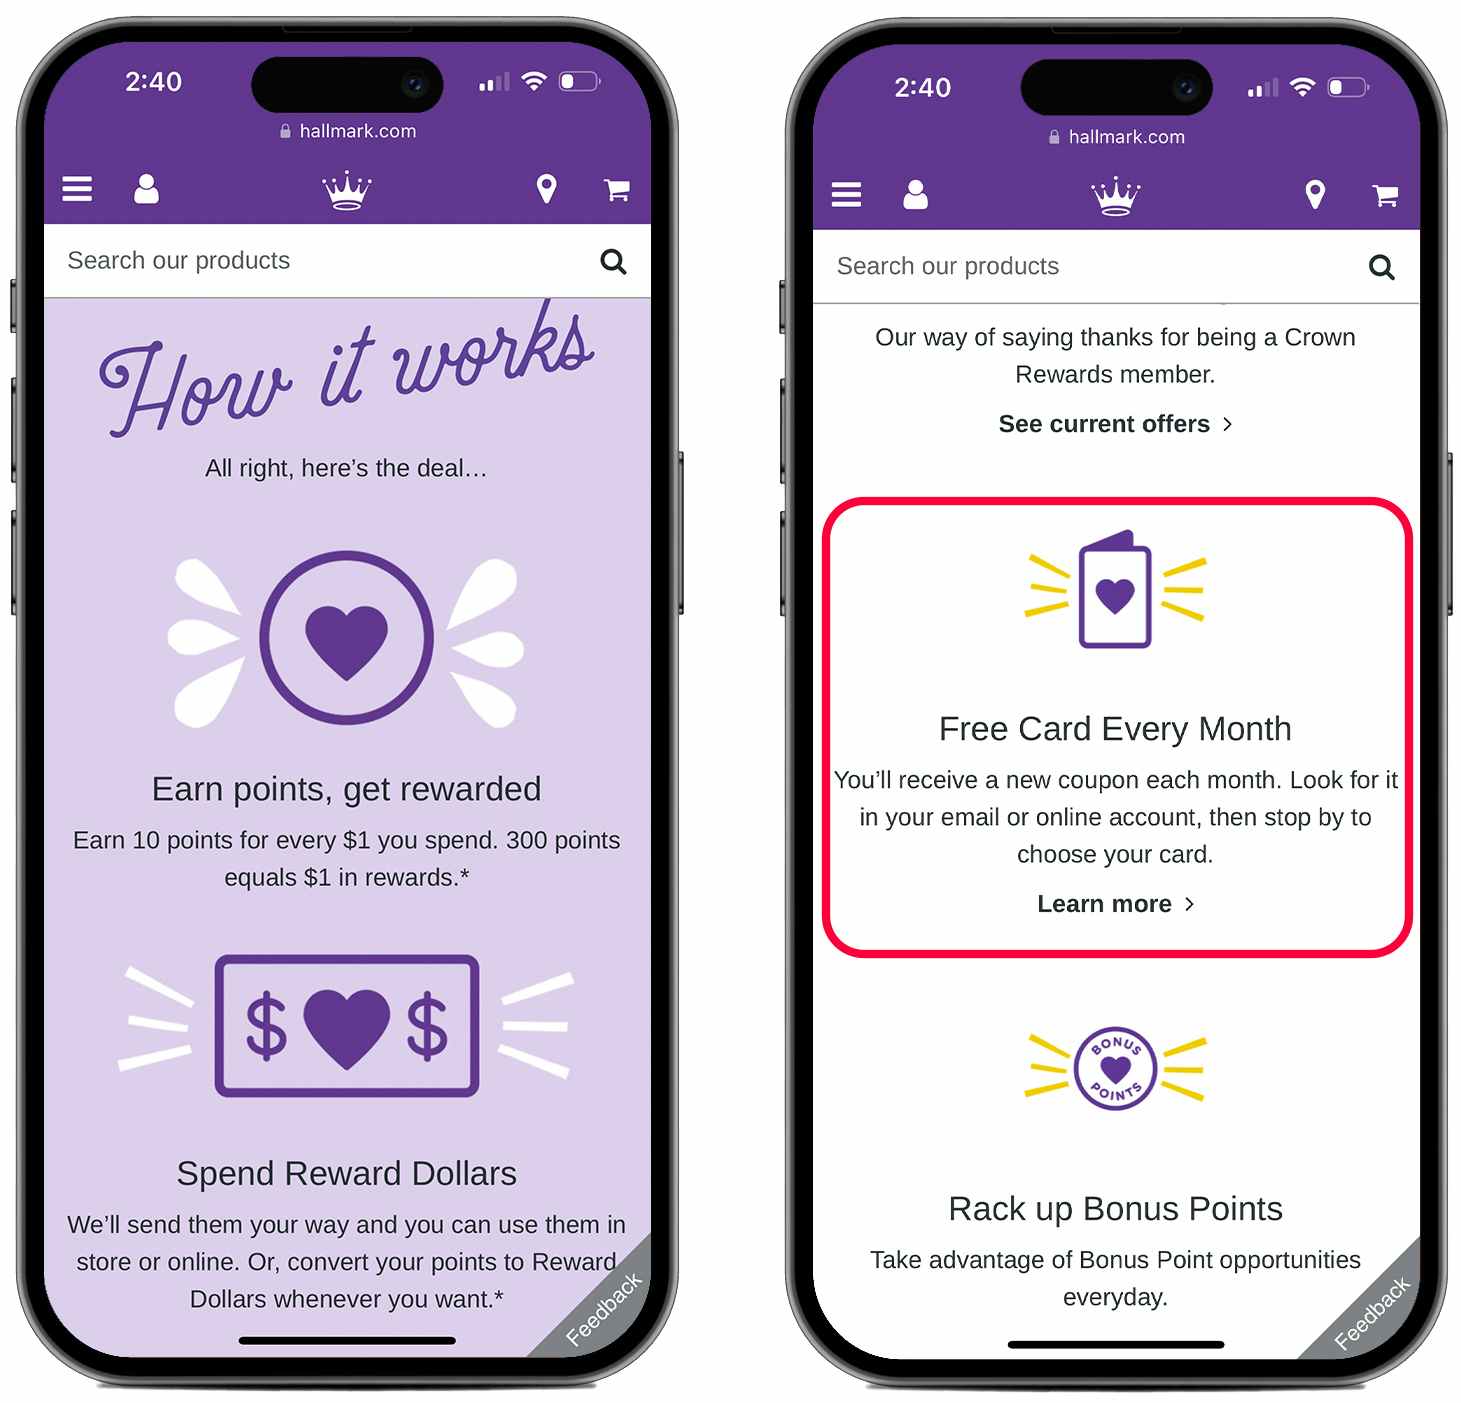 Two phones, one showing the Hallmark.com page beginning to explain how their reward program works, and the other showing the listed reward of one free card a month